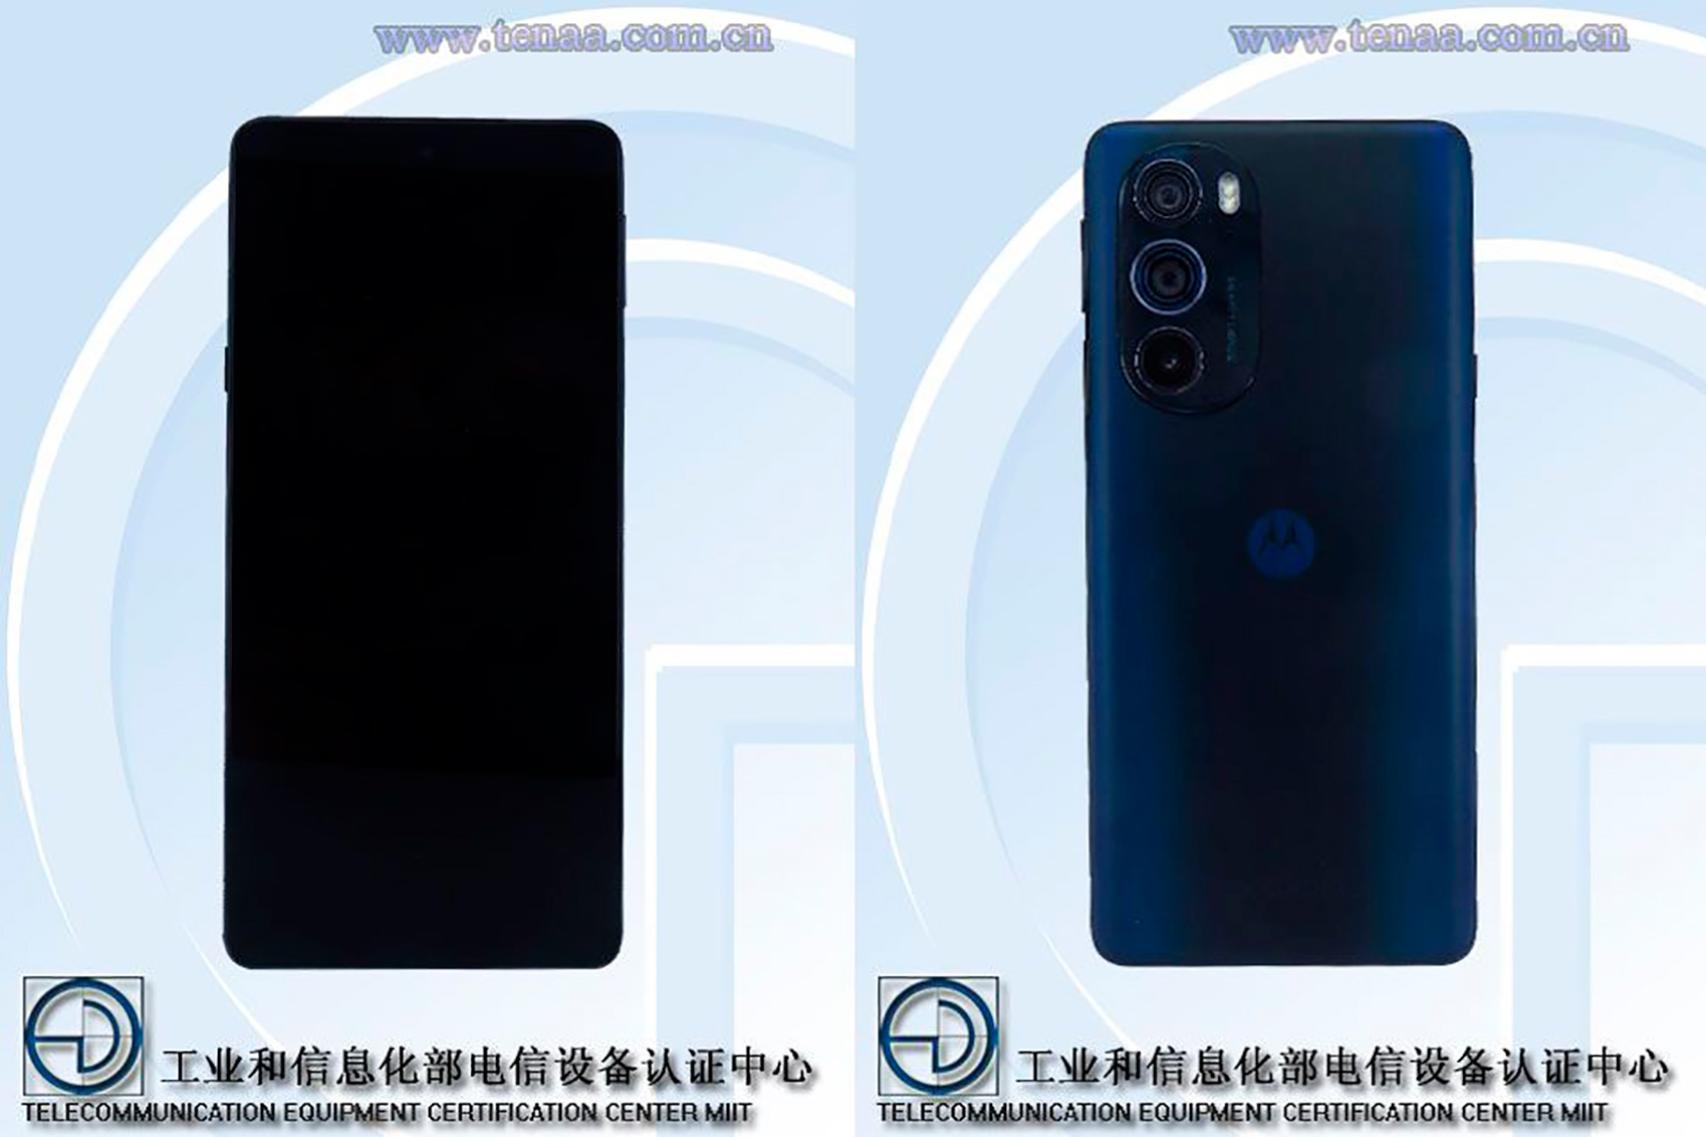 In its passage by TENAA the Moto  X Edge